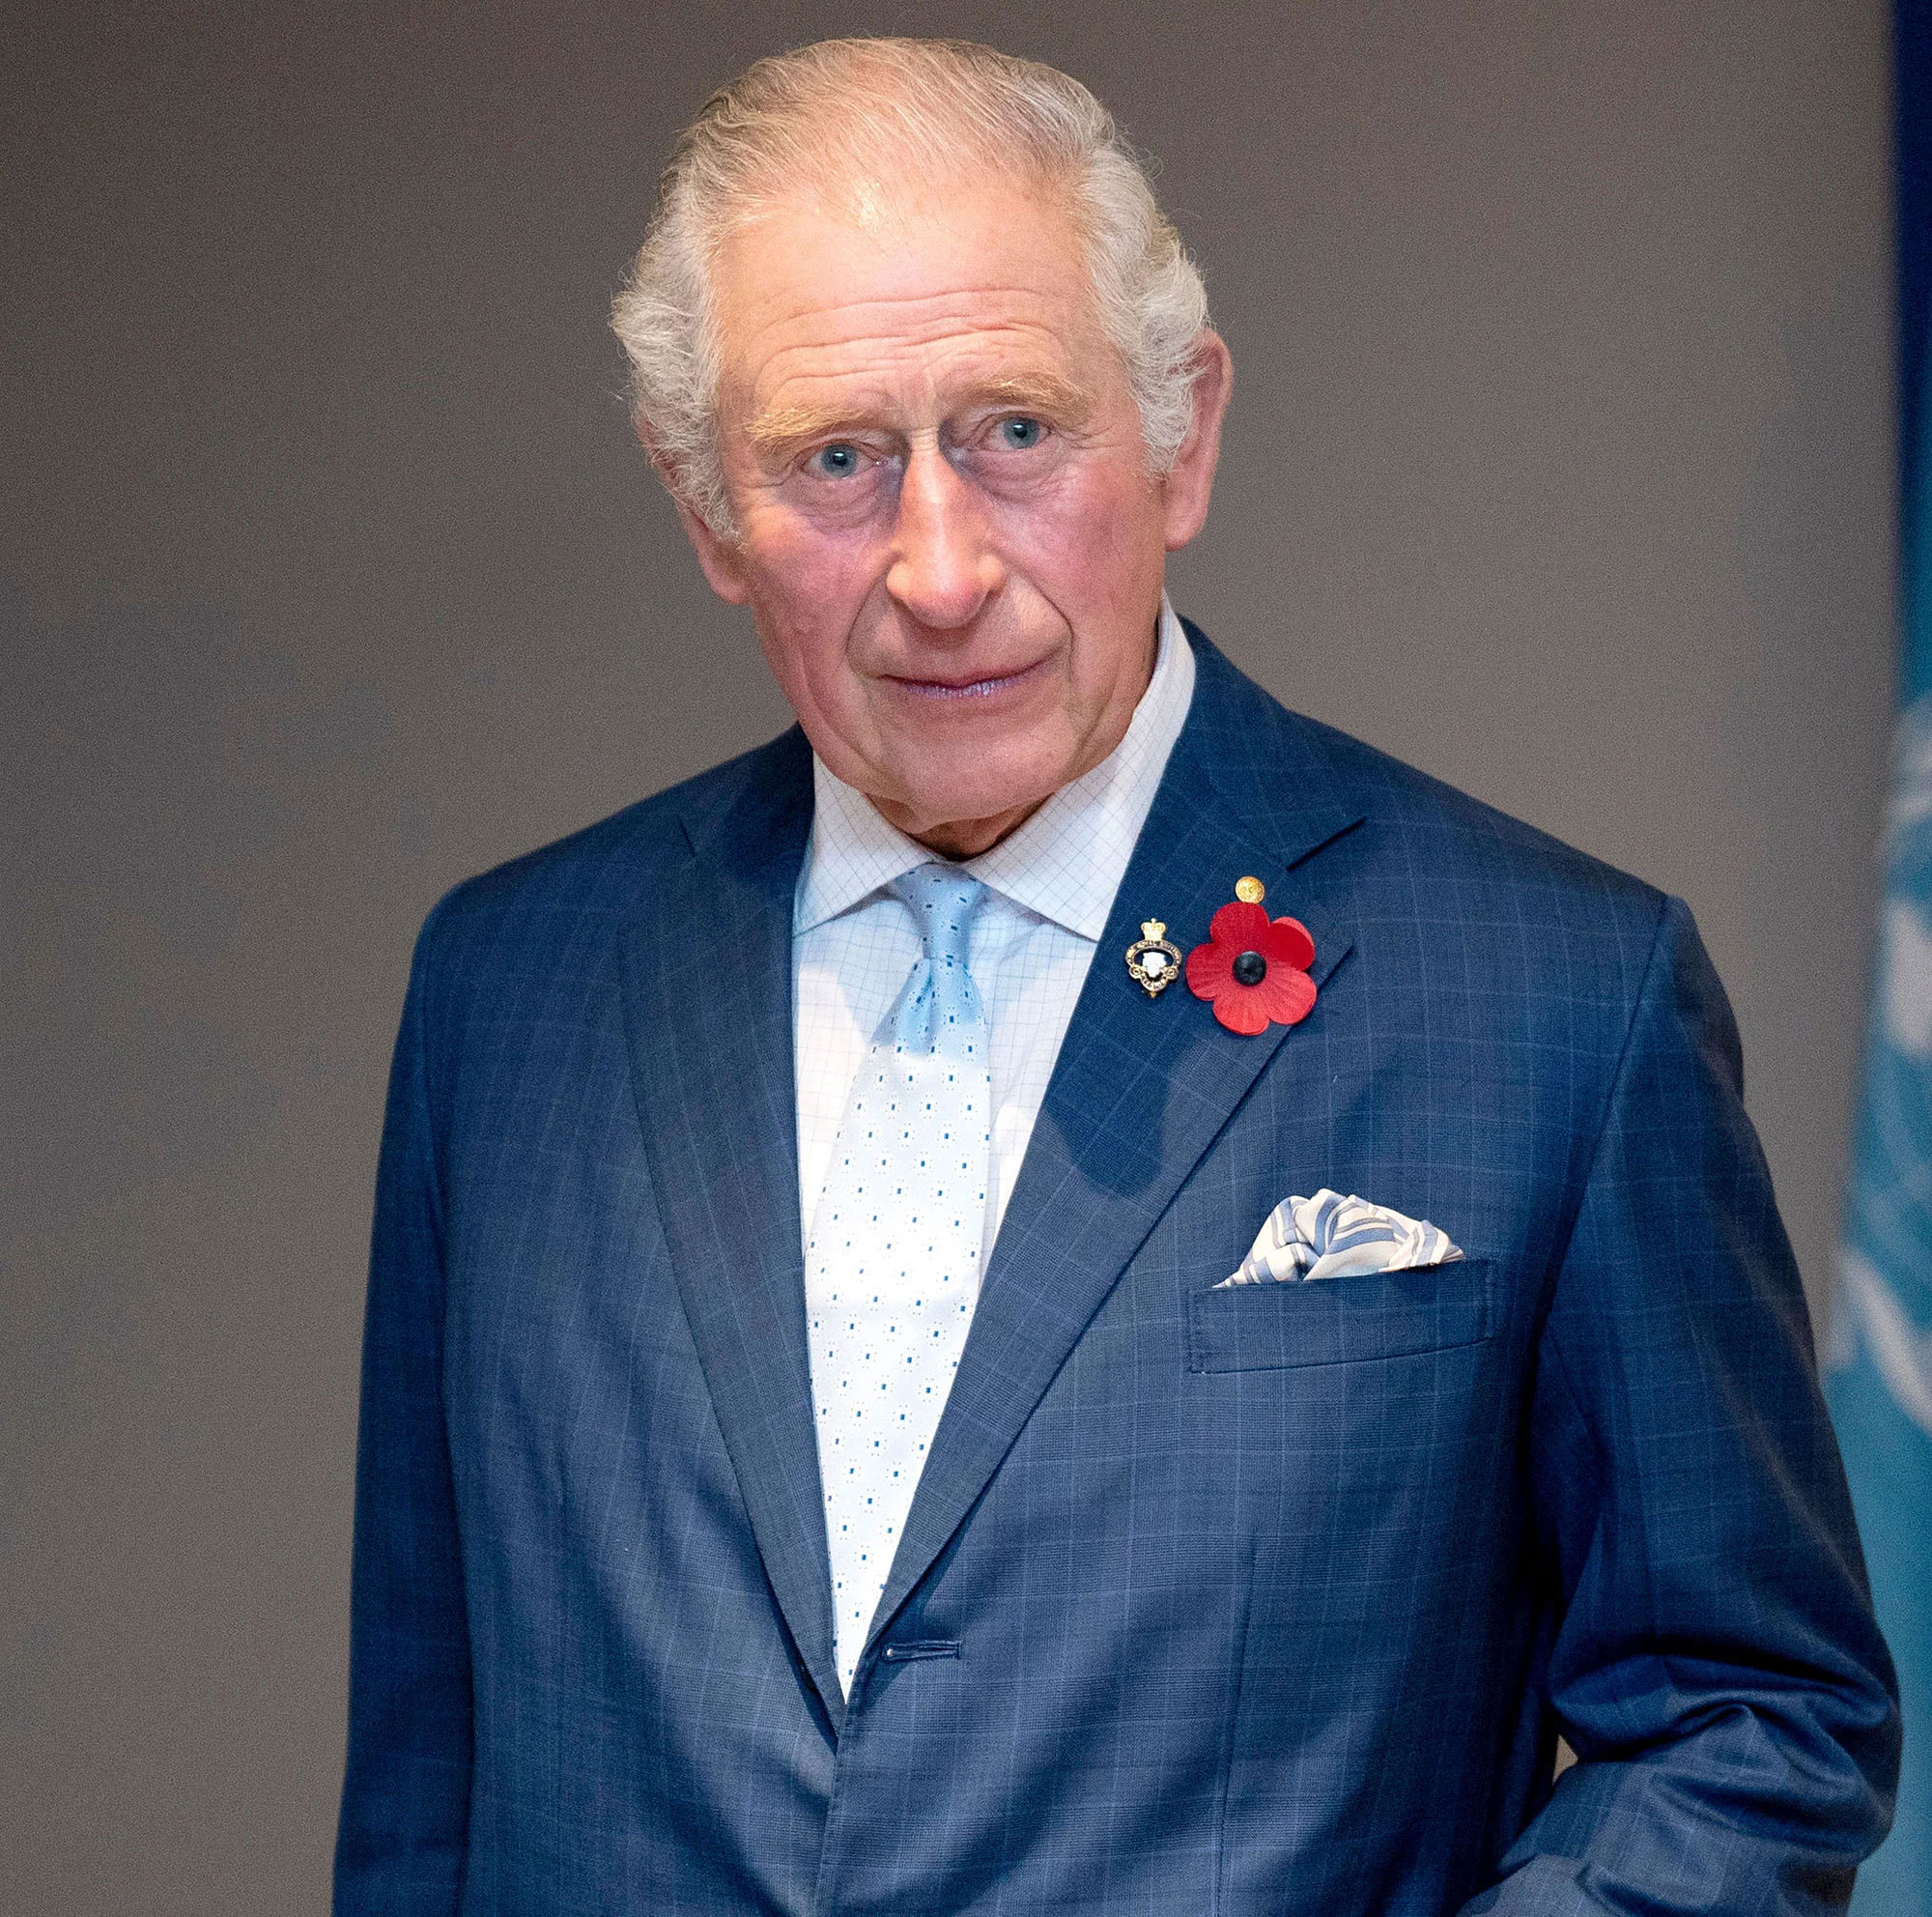 Queen Elizabeth II: why Charles is already king and other key  constitutional questions answered